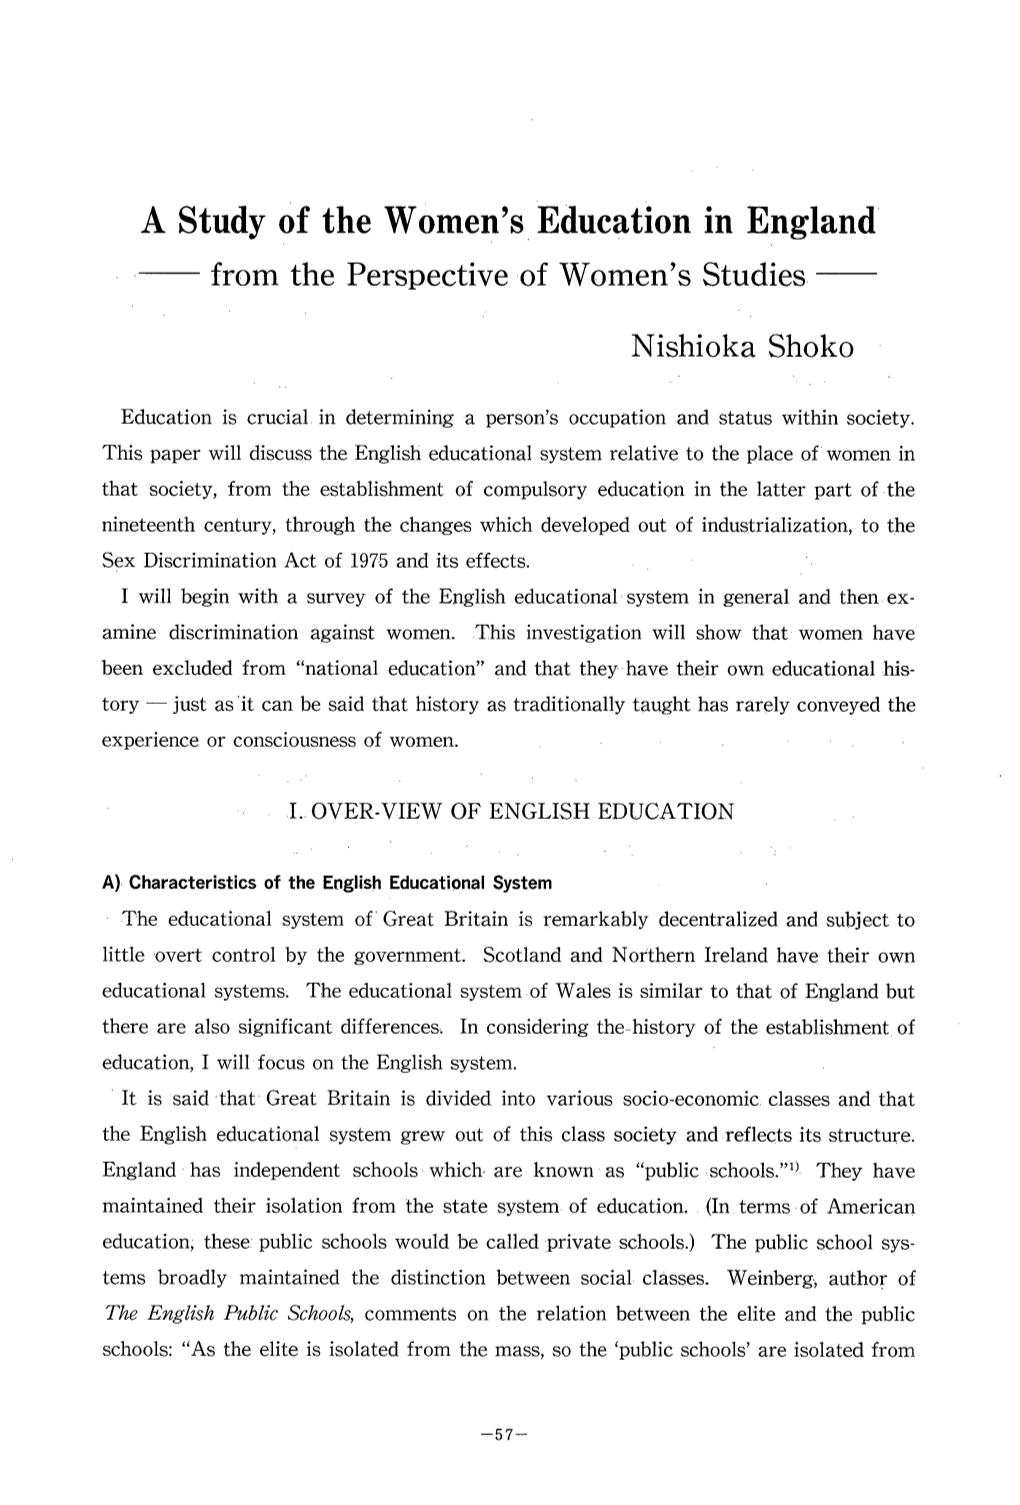 A Study of the Women's Education in England from the Perspective of Women's Studies